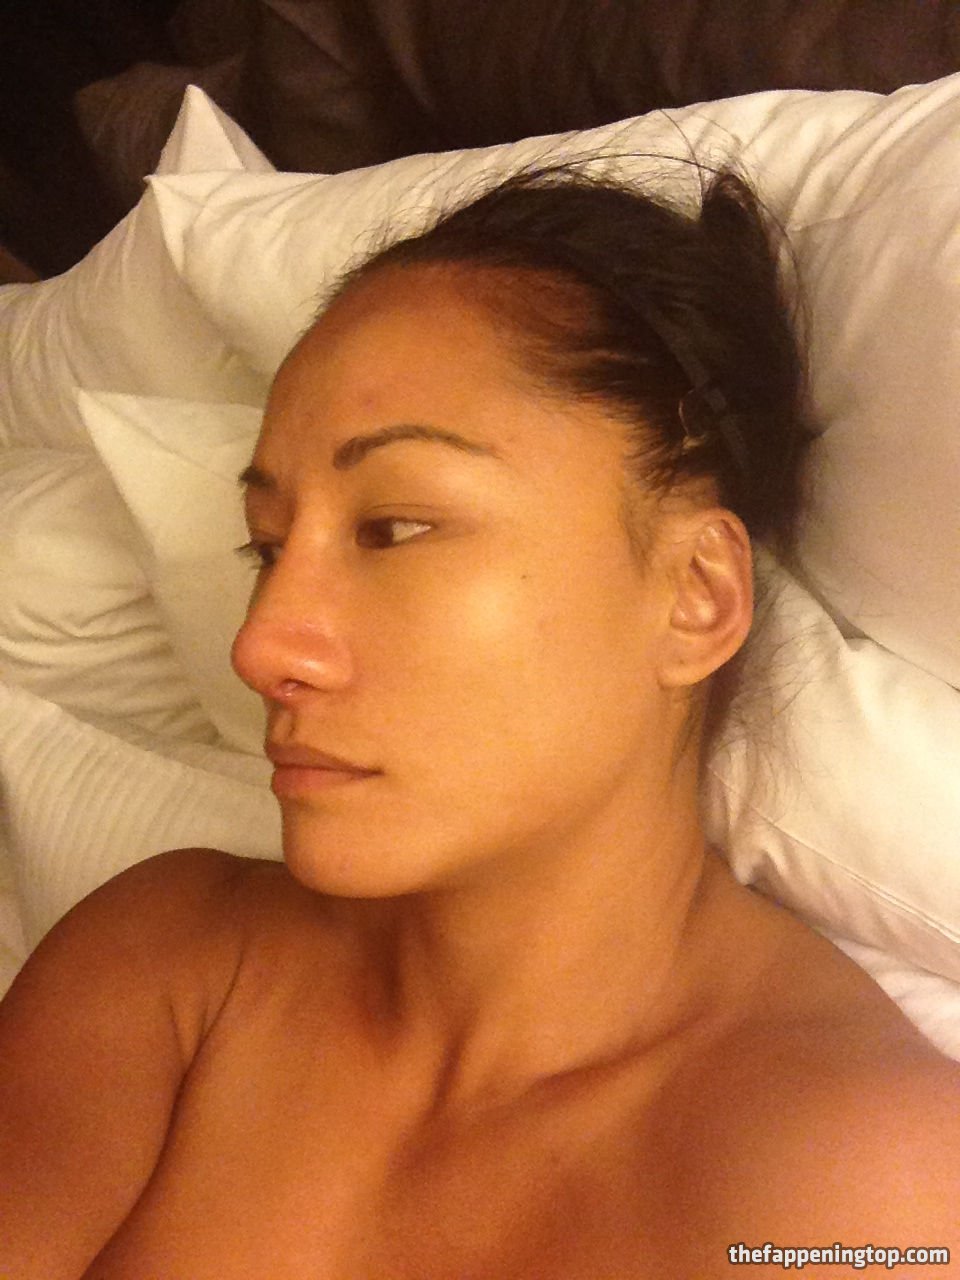 WWE Diva Gail Kim Nude Photos And Video Leaked